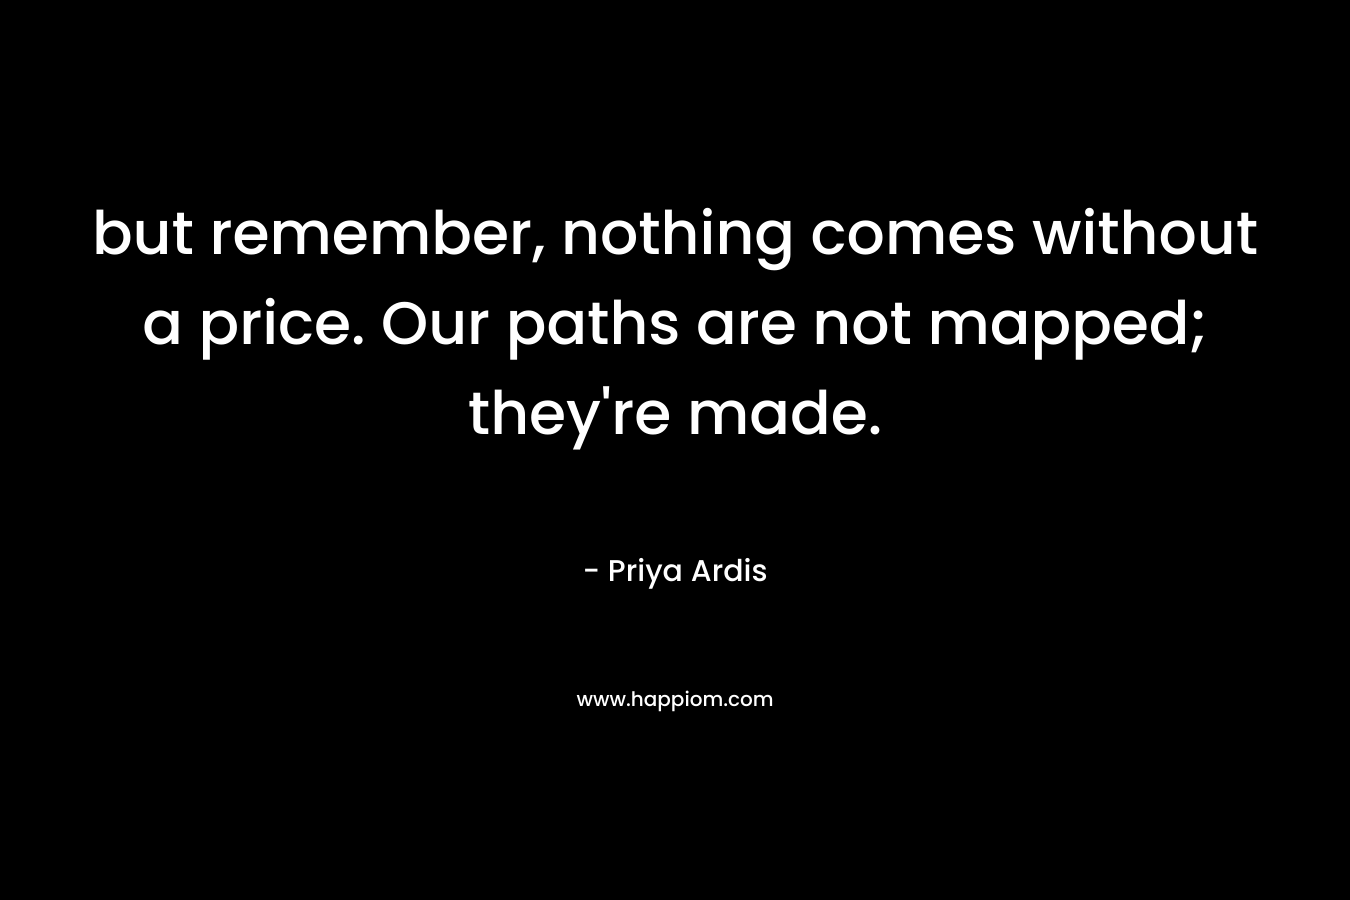 but remember, nothing comes without a price. Our paths are not mapped; they're made.